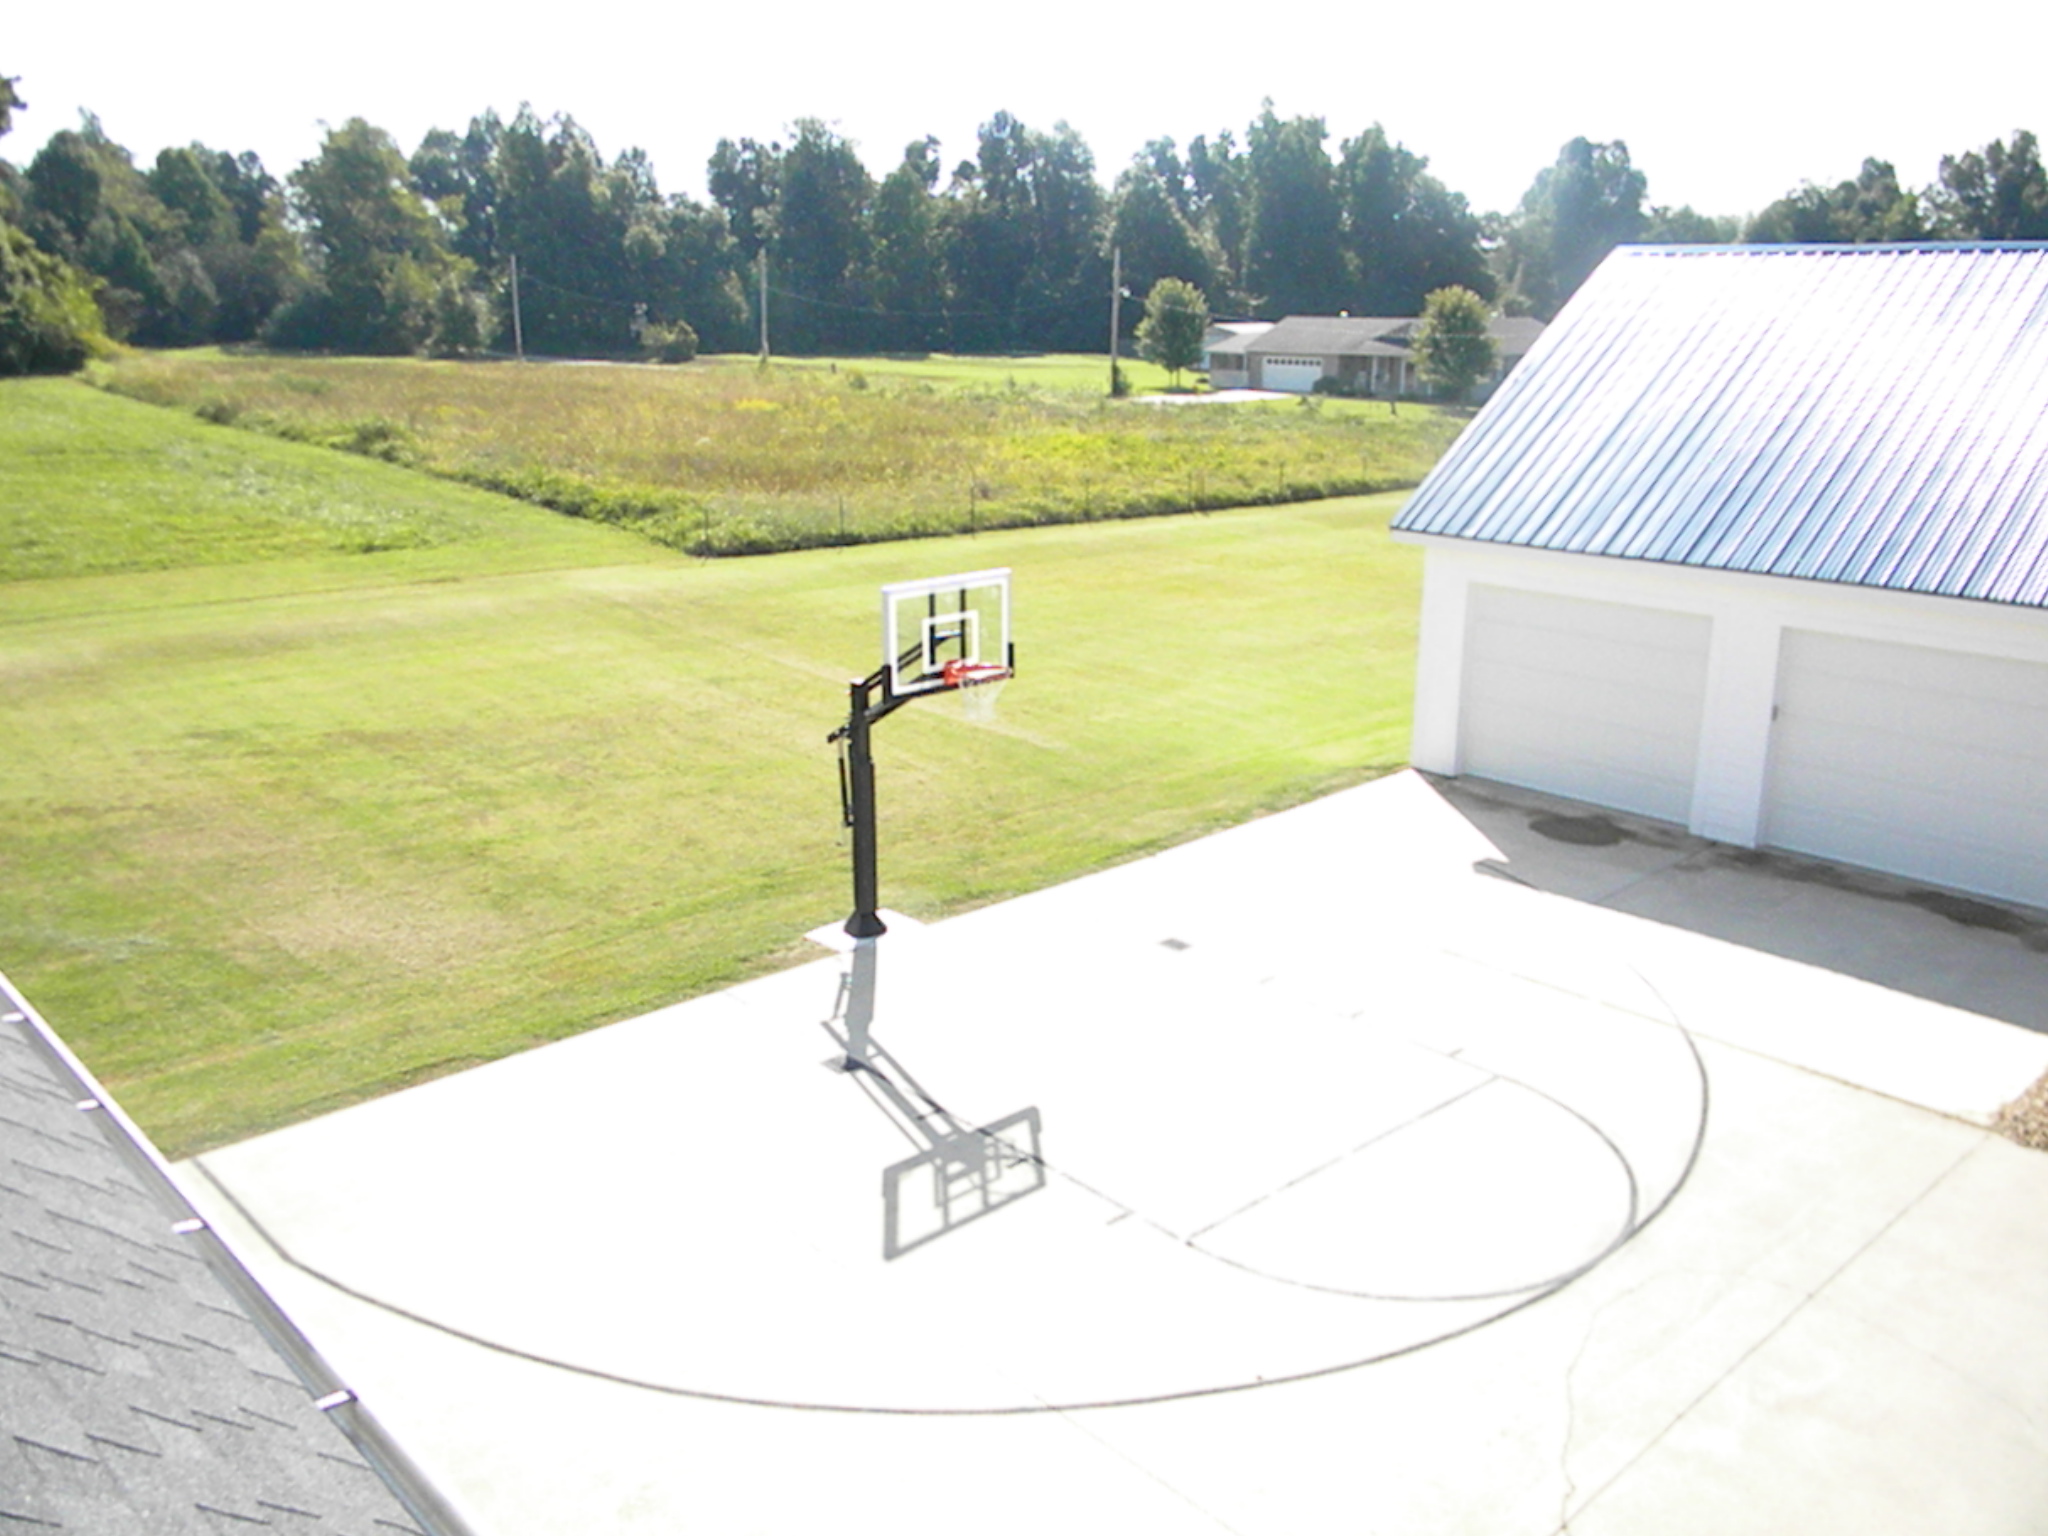 This top down view shows a Pro Dunk Silver Basketball installed above a concrete driveway.